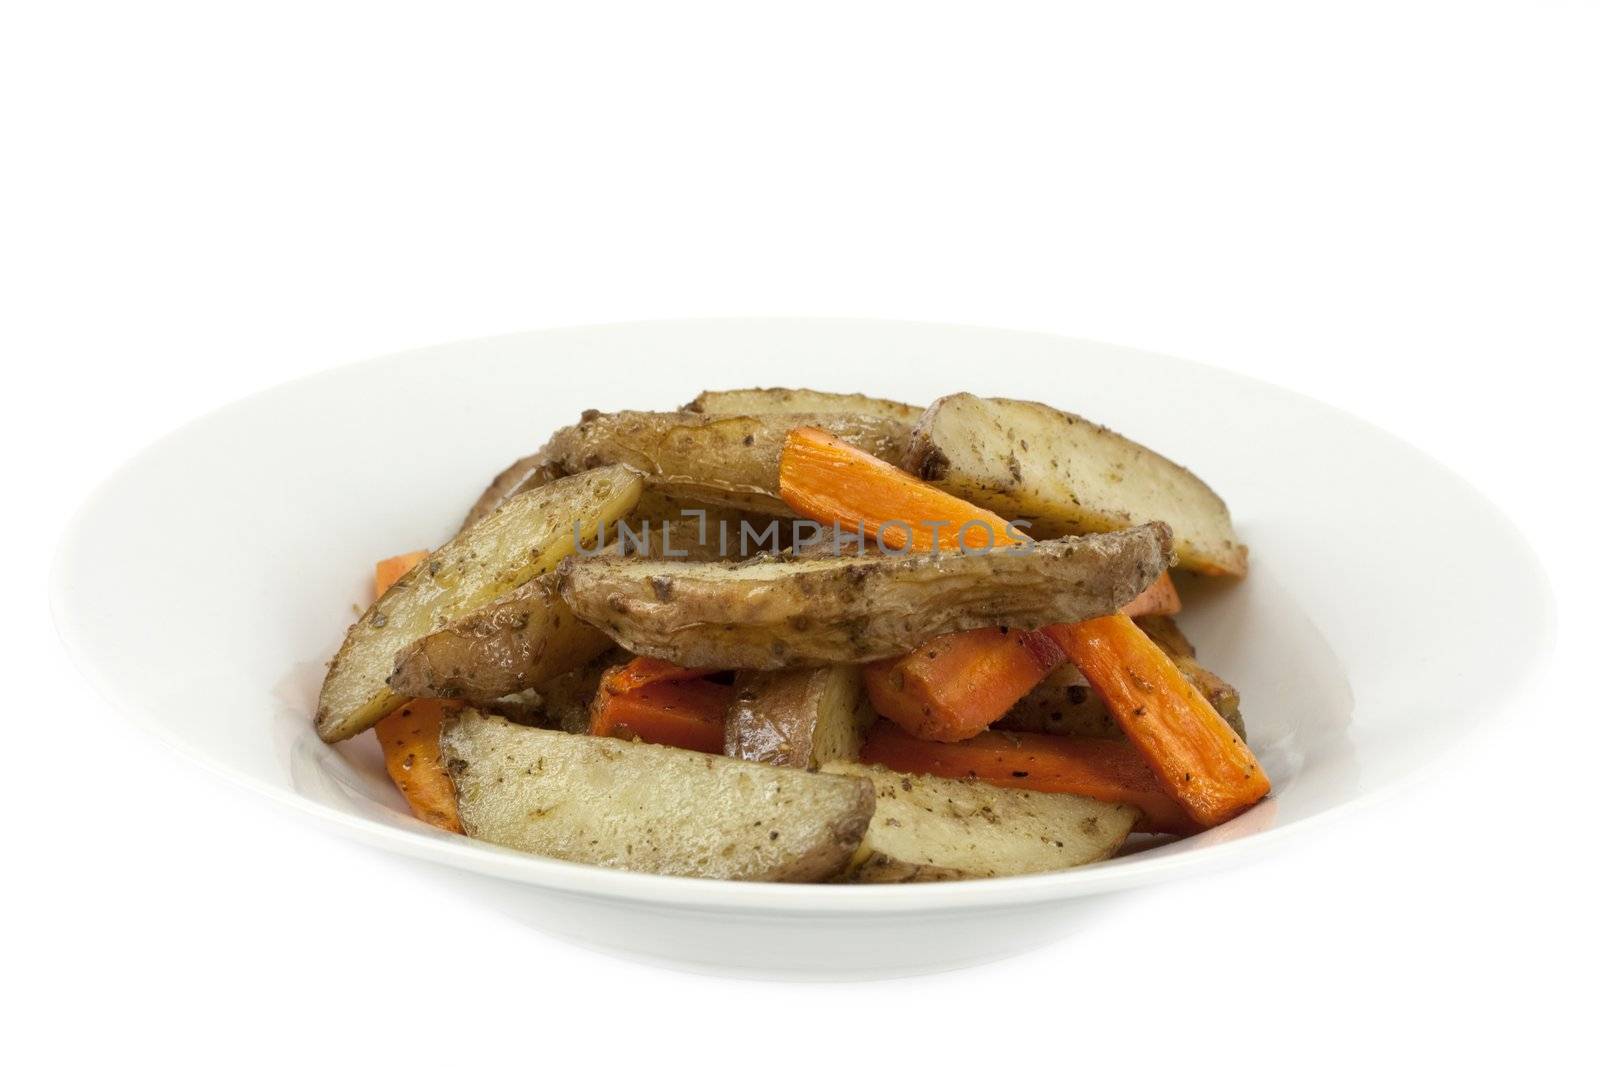 Plate full of golden fried potatoes and carrots on white